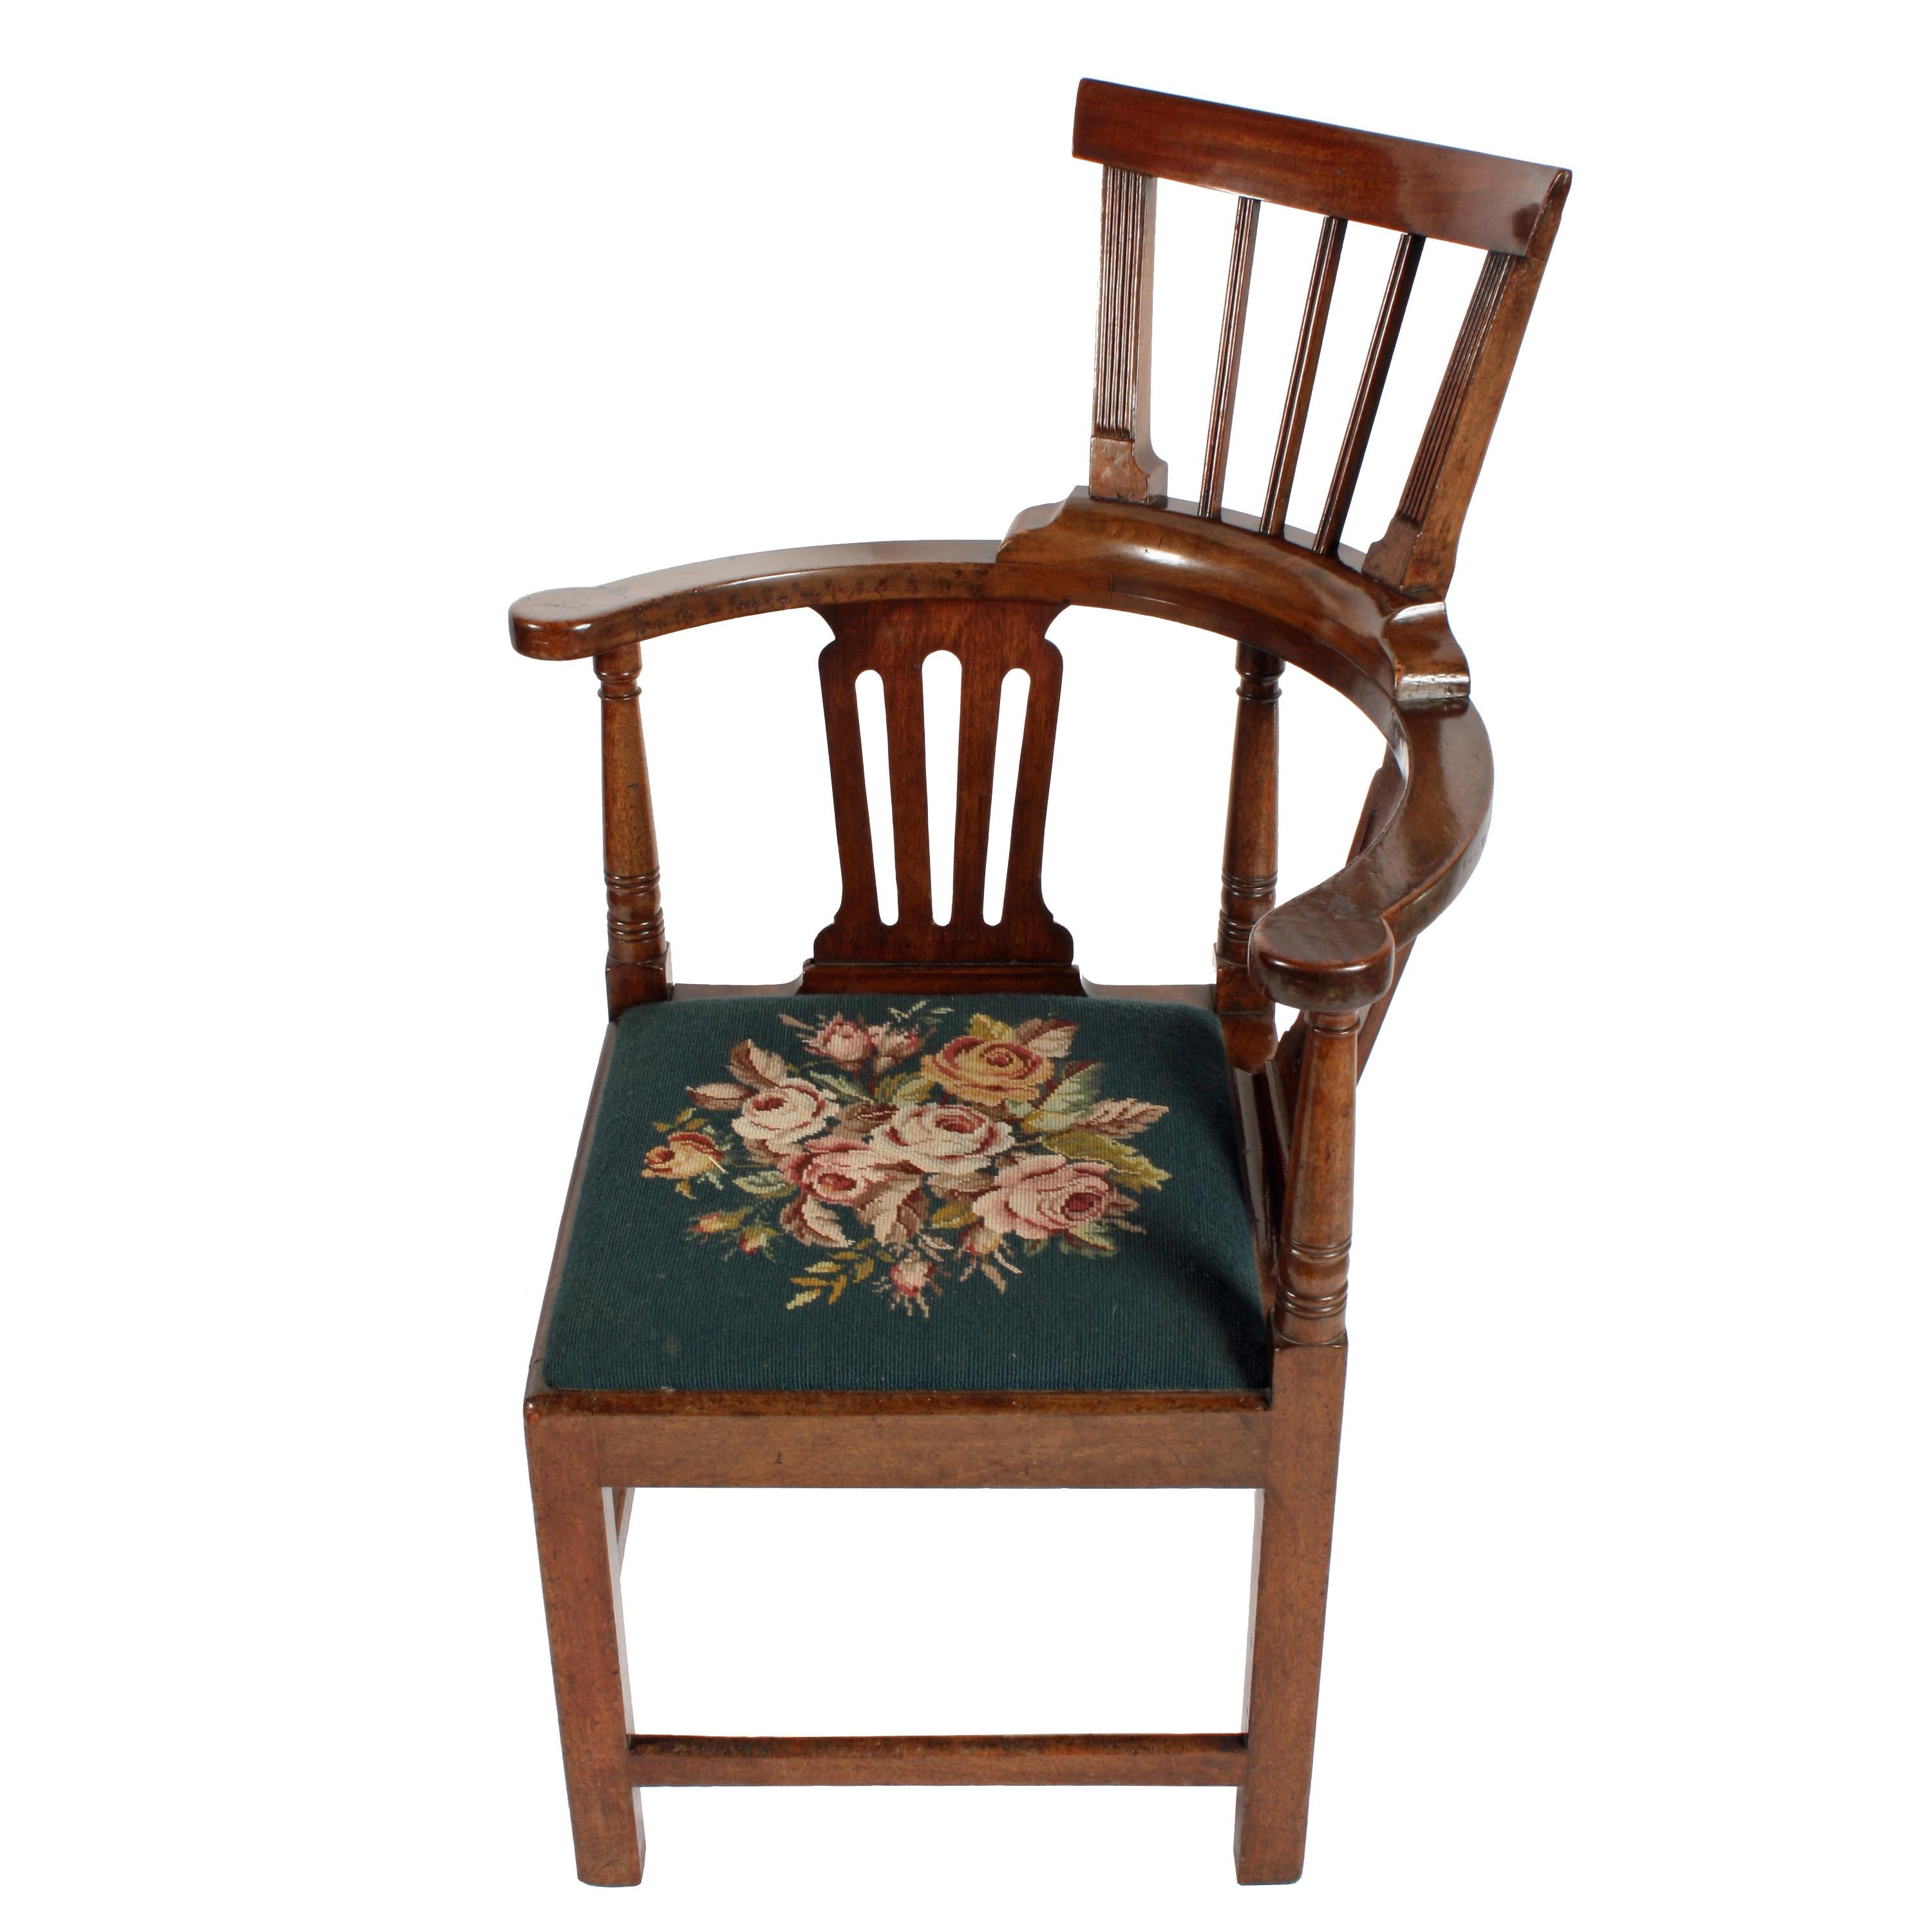 An 18th century mahogany corner armchair.

The chair has a high comb back with four square legs that have cross rails between and a drop in needlework upholstered pad seat.

The chair has three turned supports and two pierced splats forming the